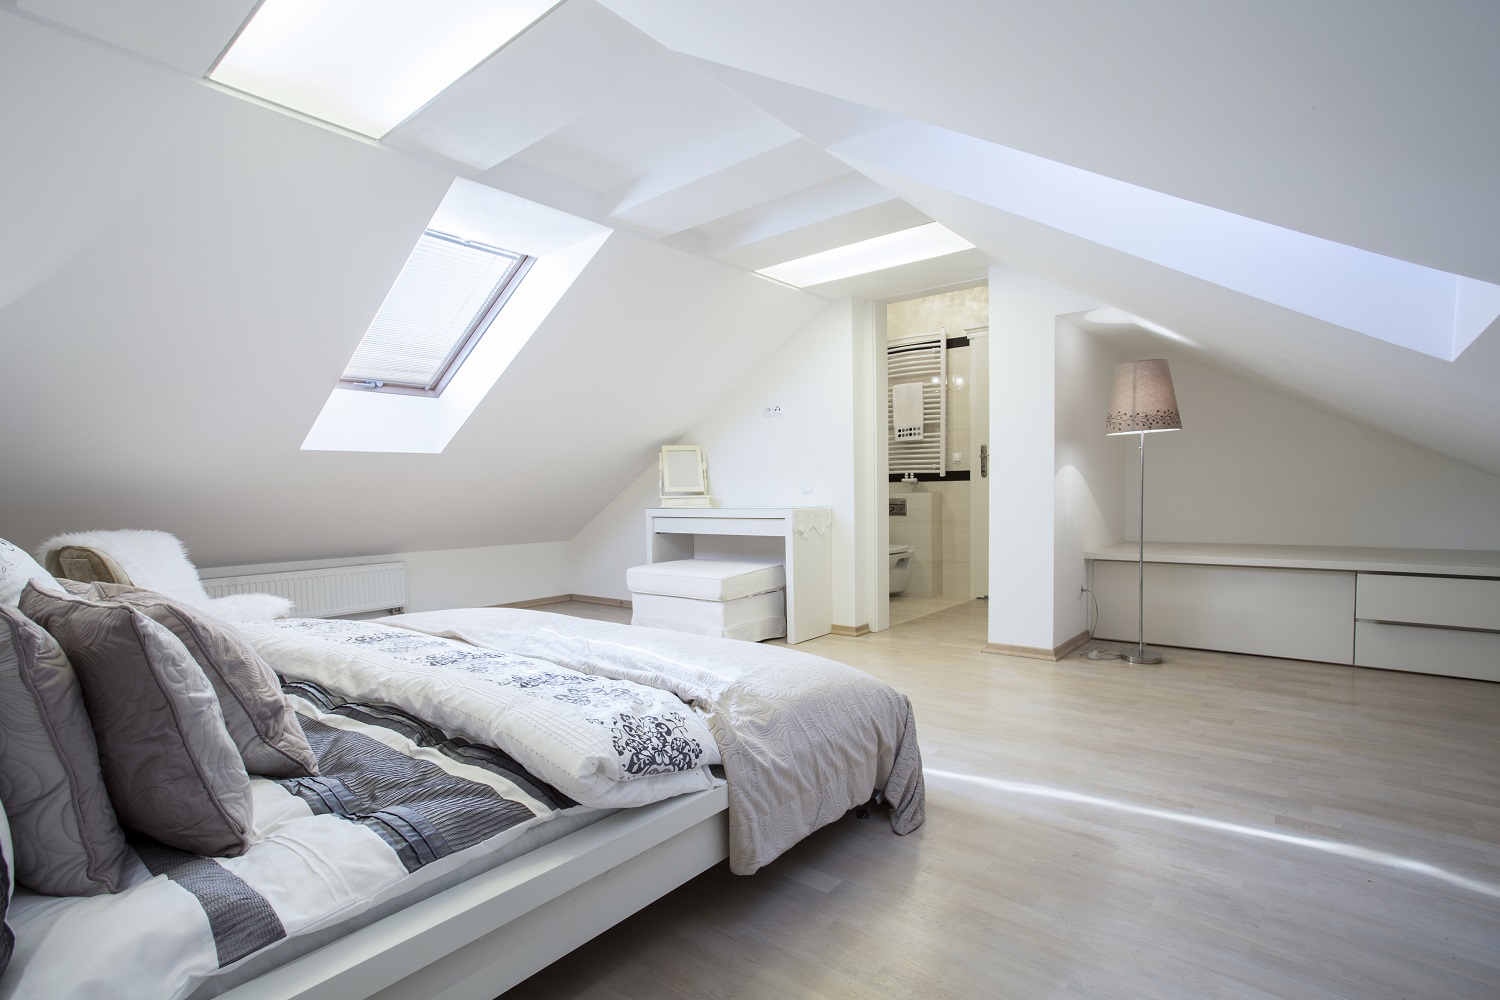 Lifestyle image a large attic bedroom with an ensuite